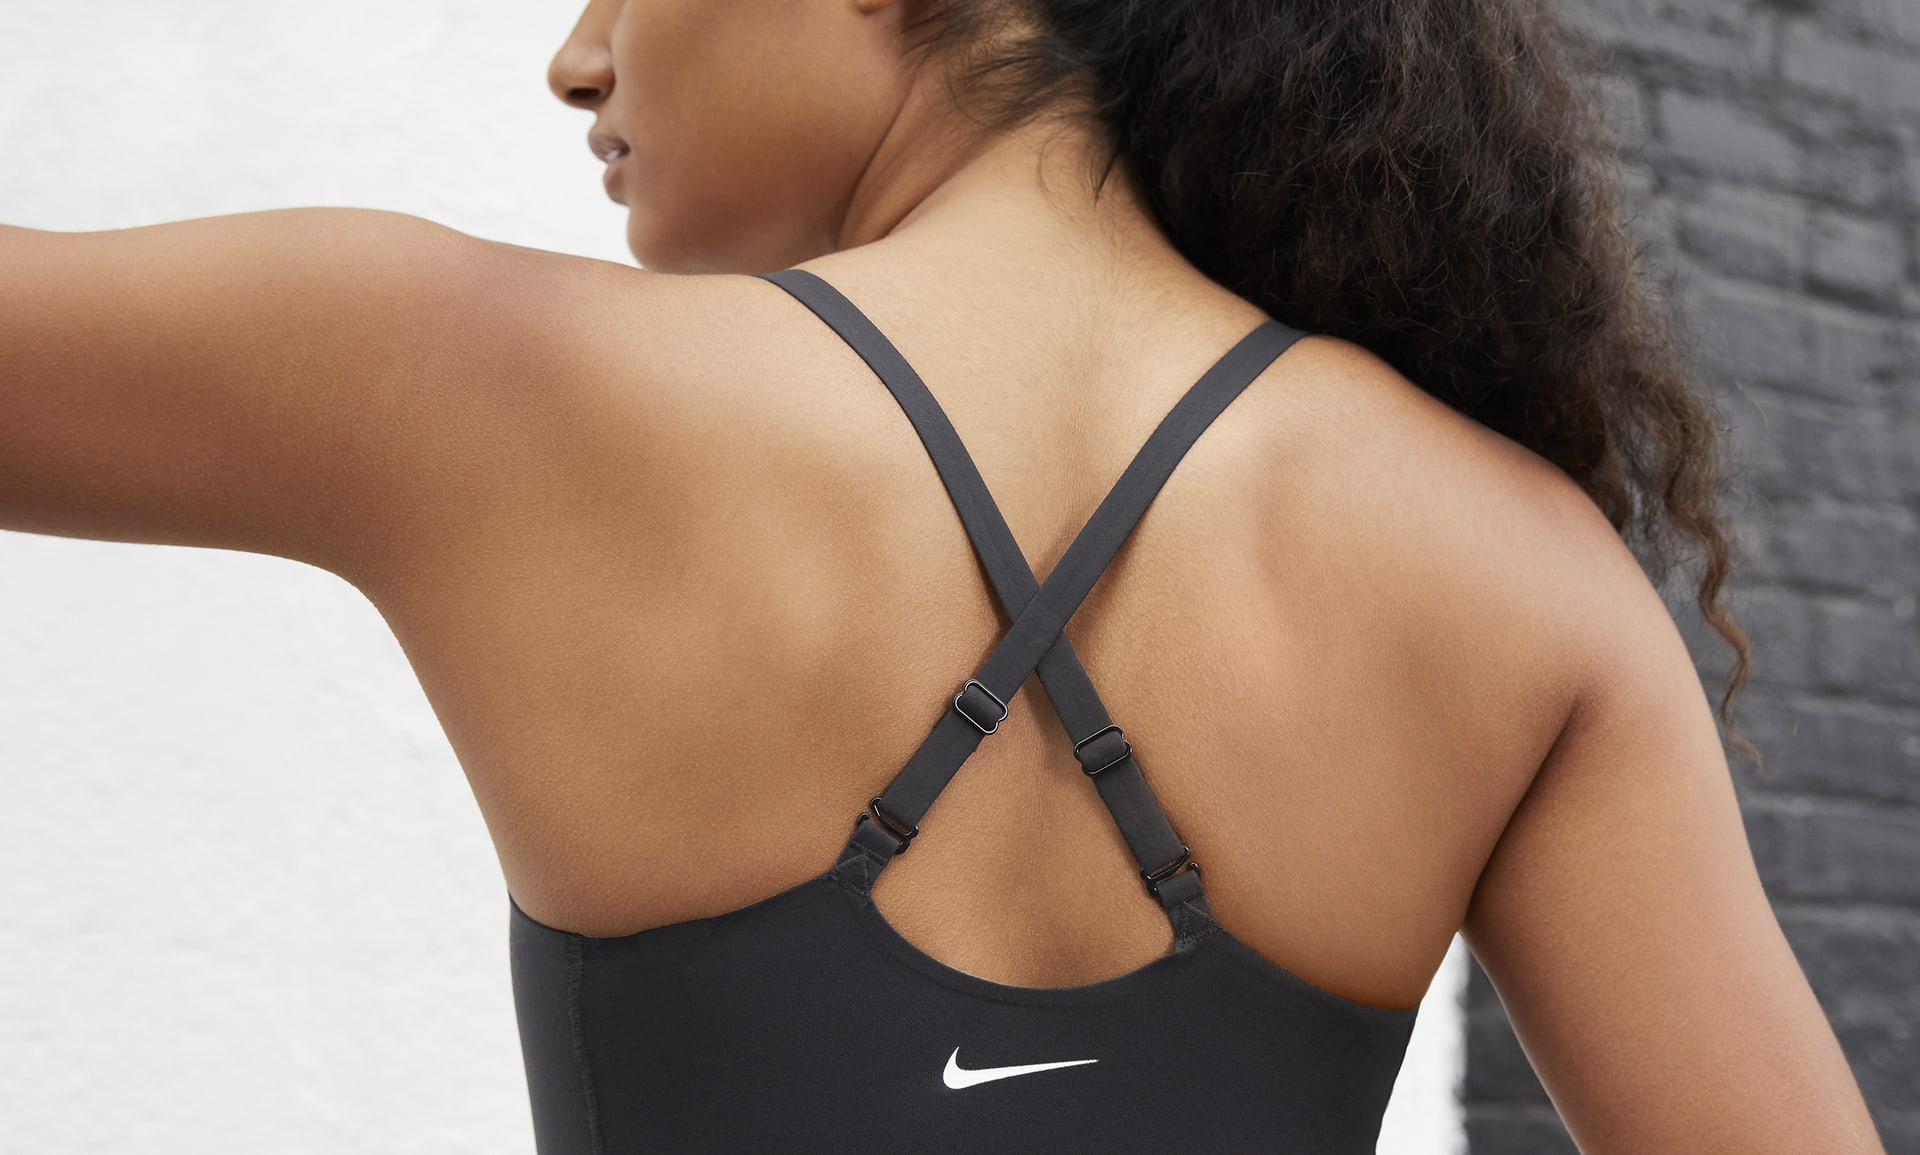 Nike Indy Luxe Sports Bra in Black & White